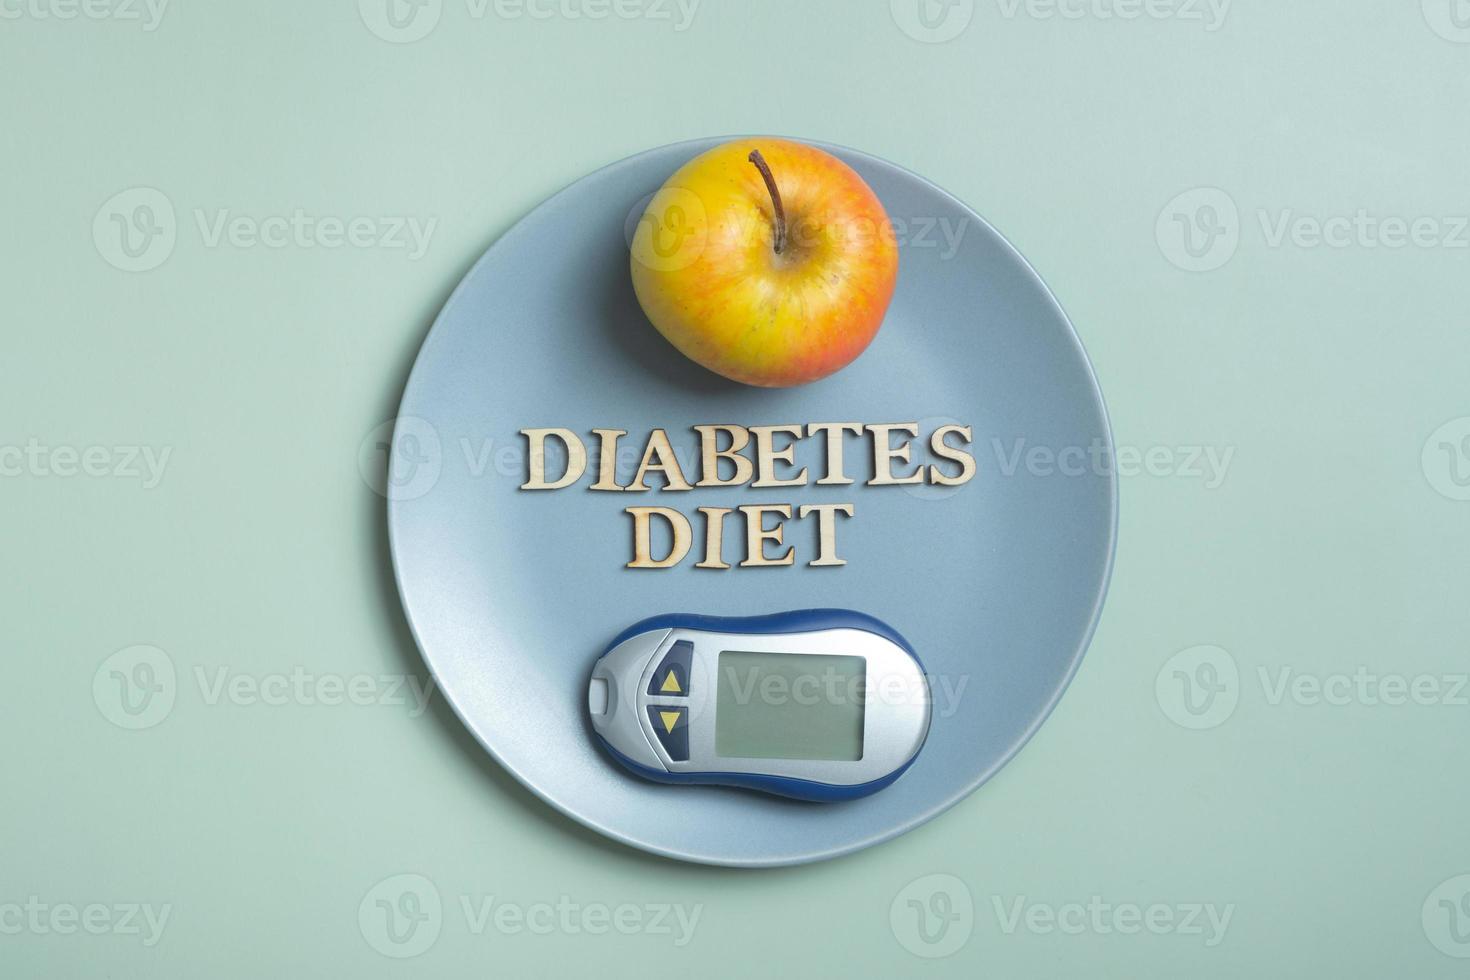 Diabetes Diet Plan text. Glucometer and plate with apple on colored background flat lay, top view photo